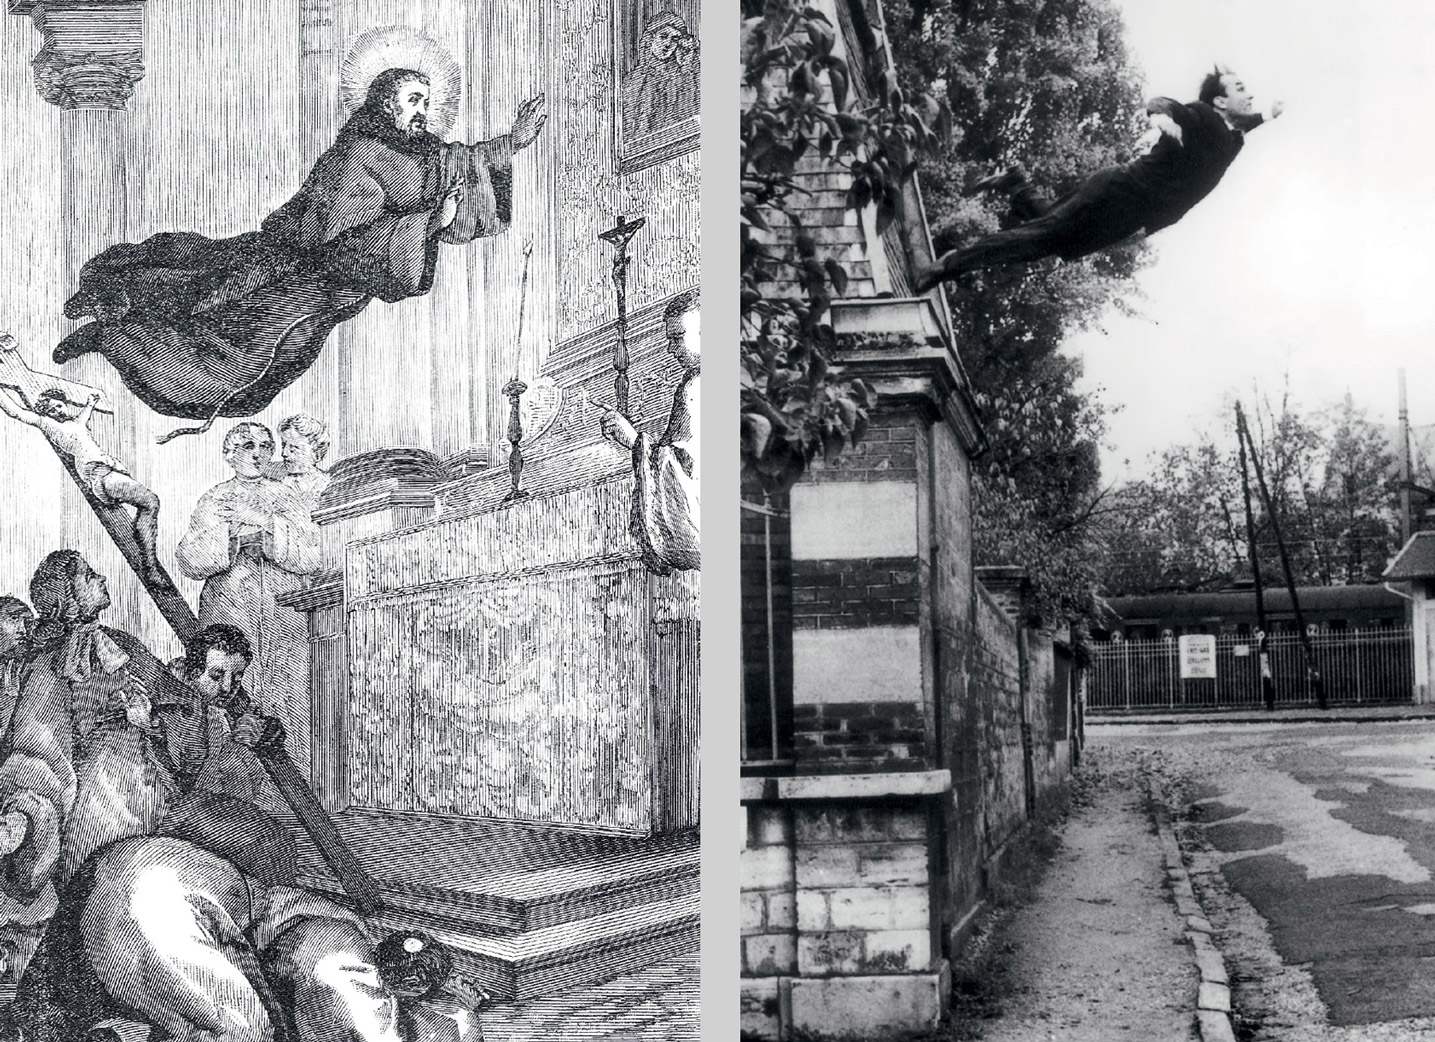 left: Saint Joseph of Copertino, artist unknown; right: Yves Klein, The Leap into the Void, 1960.